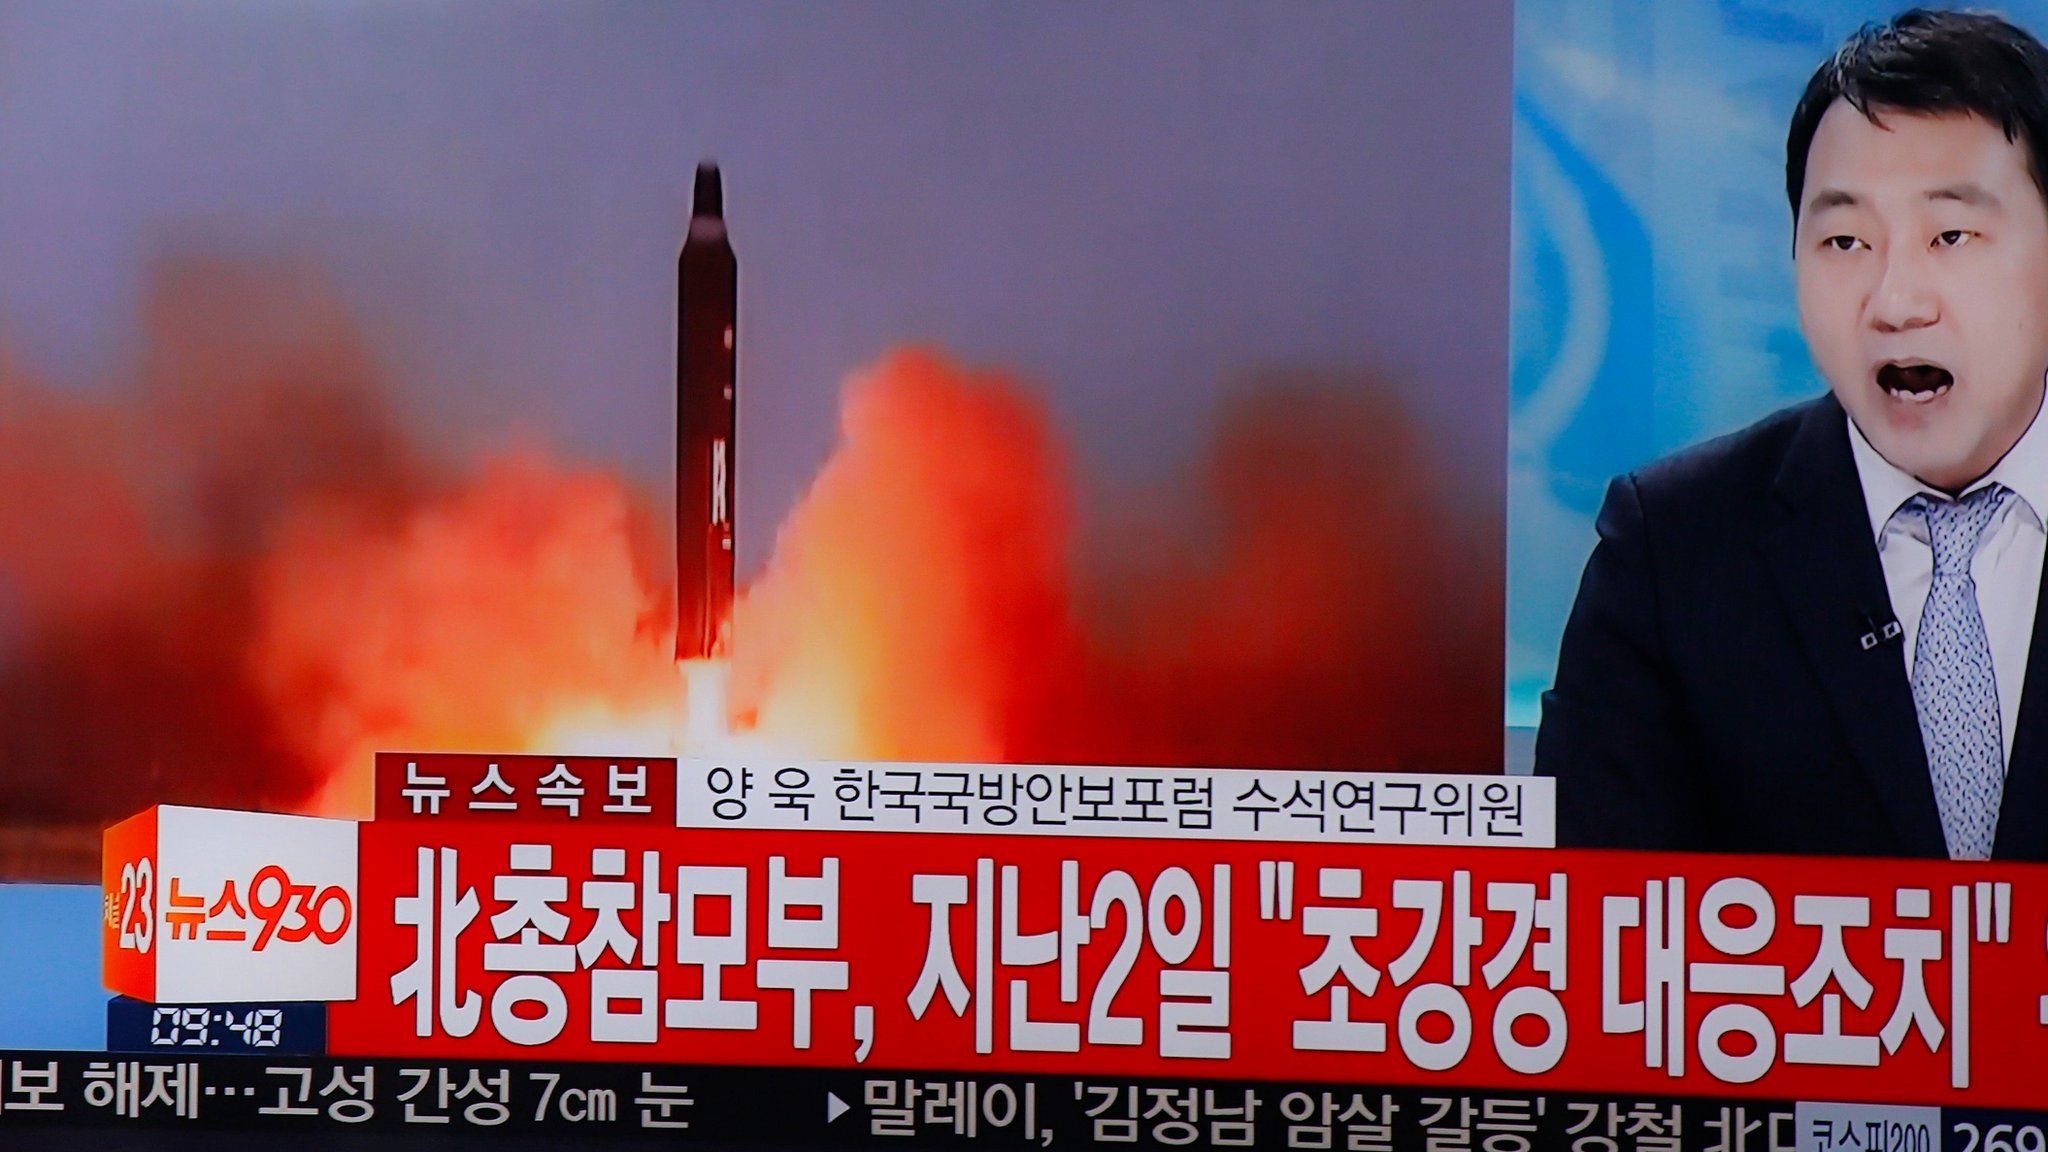 South Korean news broadcast about North Korean missile tests